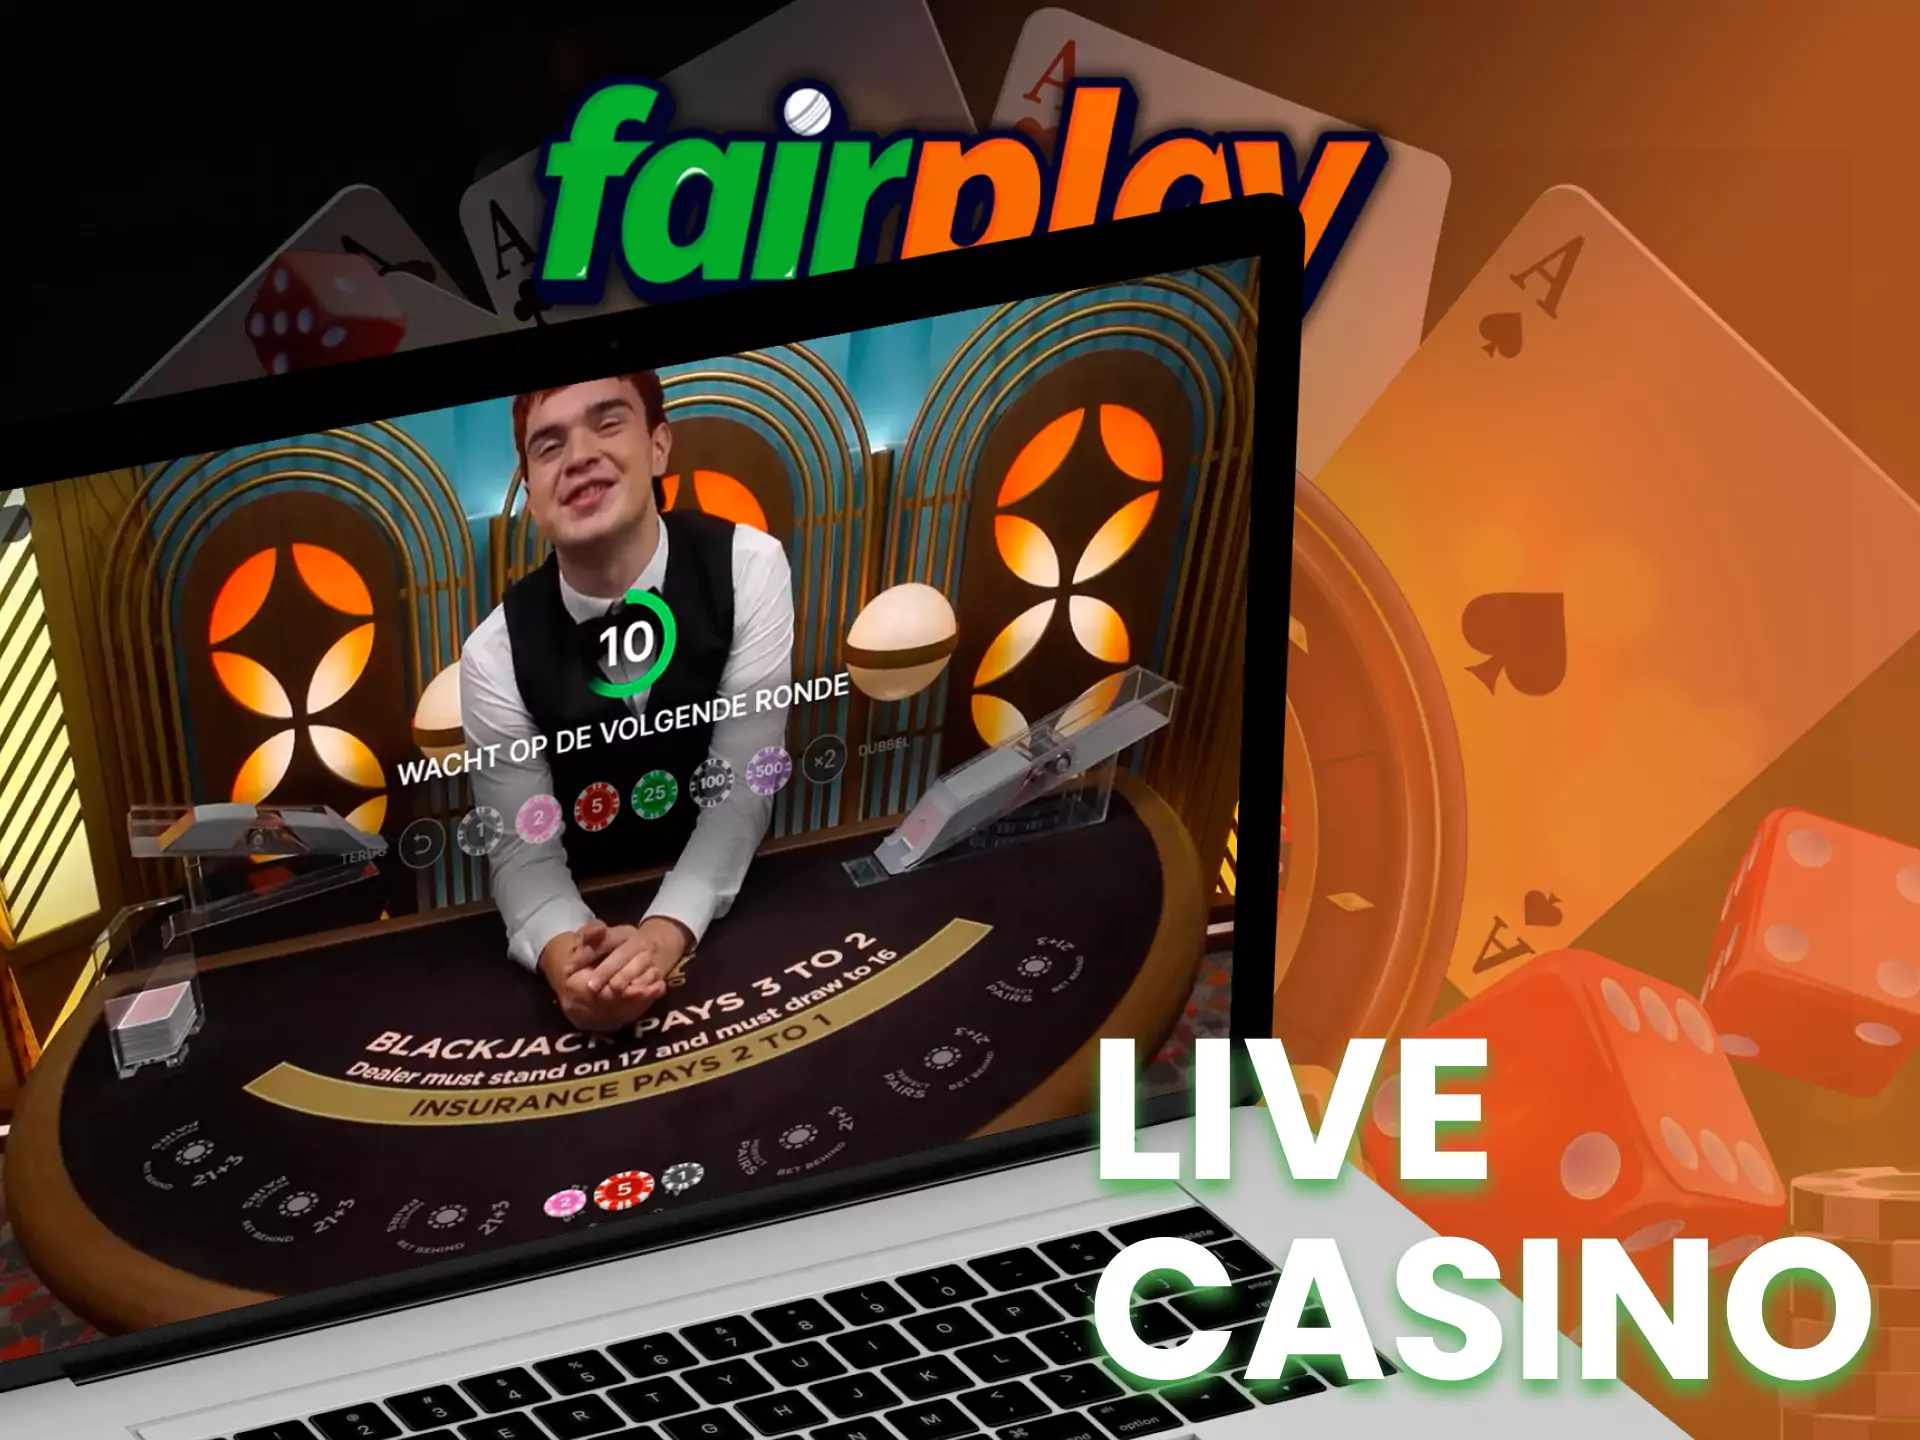 At Fairplay, play live casino games with real dealers.